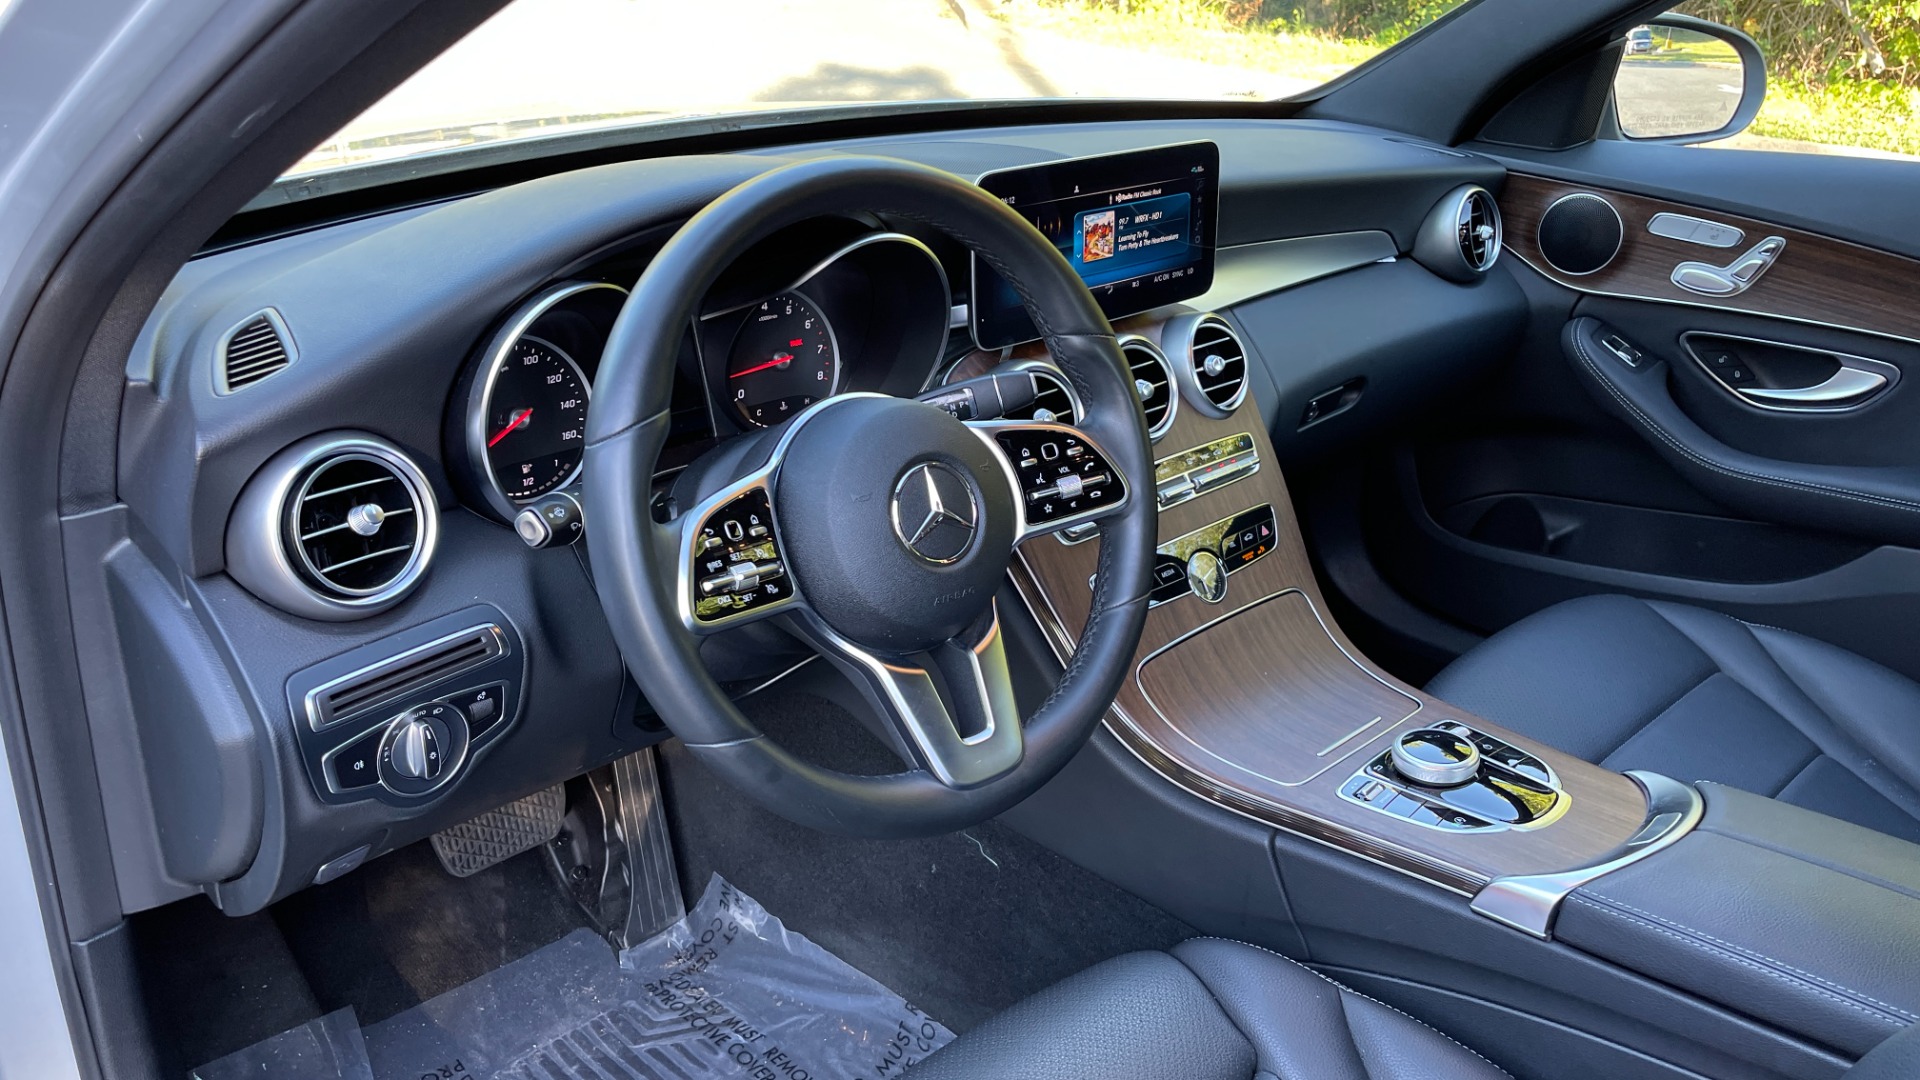 Used 2020 Mercedes-Benz C-Class C300 / BACKUP CAMERA / HEATED SEATS / WOOD GRAIN TRIM for sale $36,395 at Formula Imports in Charlotte NC 28227 10